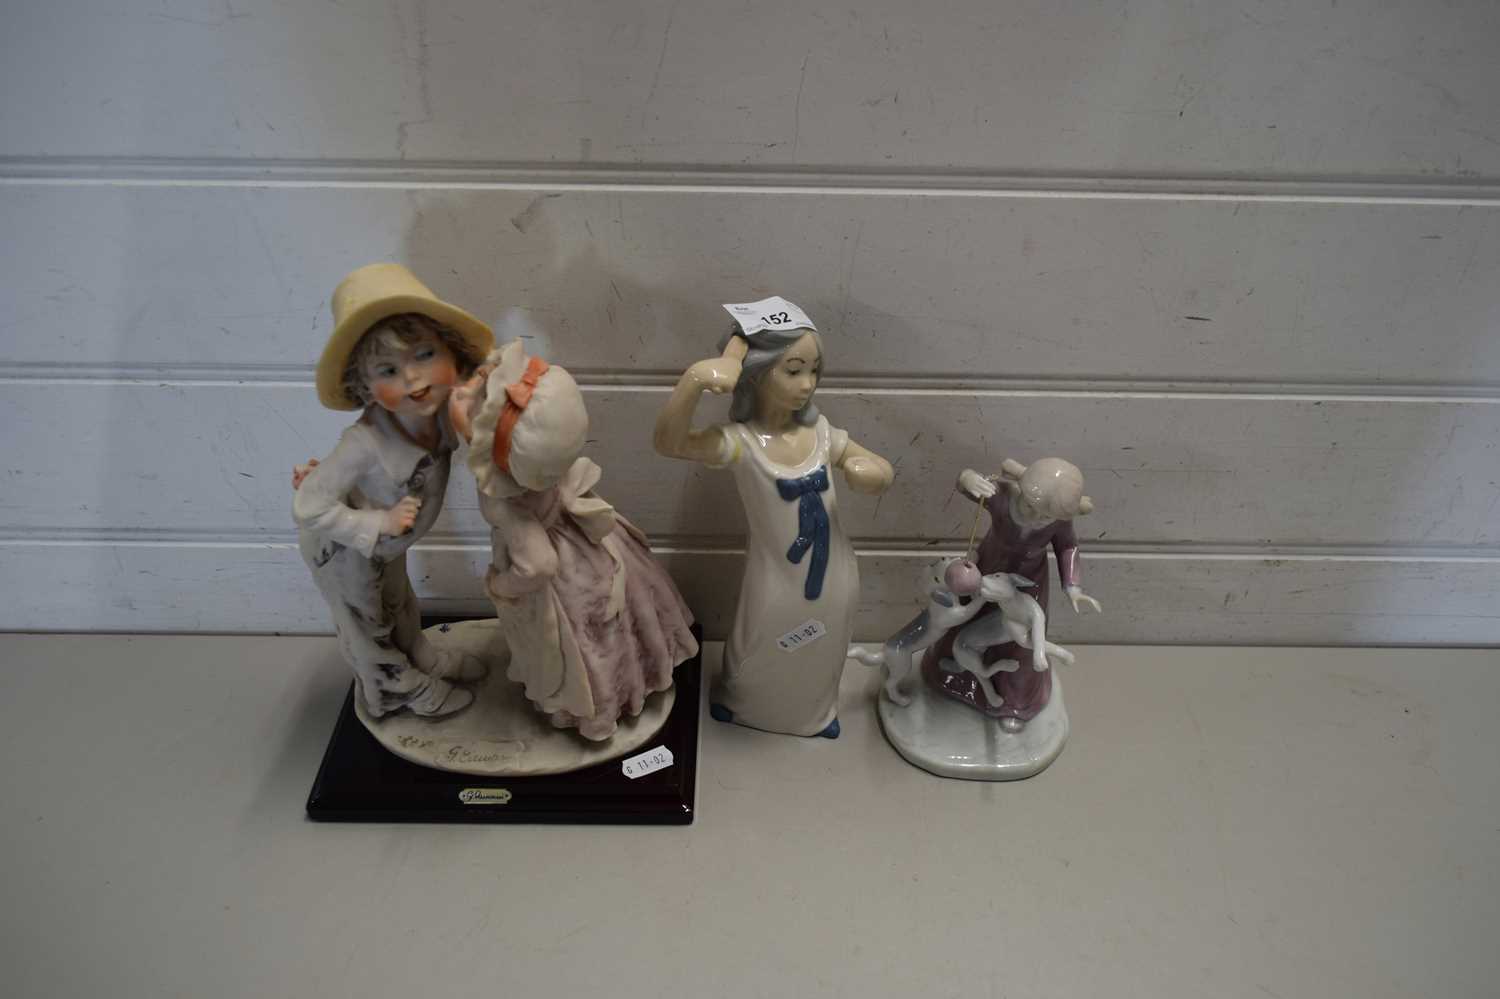 TWO LLADRO STYLE FIGURINES TOGETHER WITH A FURTHER COMPOSITION FIGURE OF TWO CHILDREN KISSING